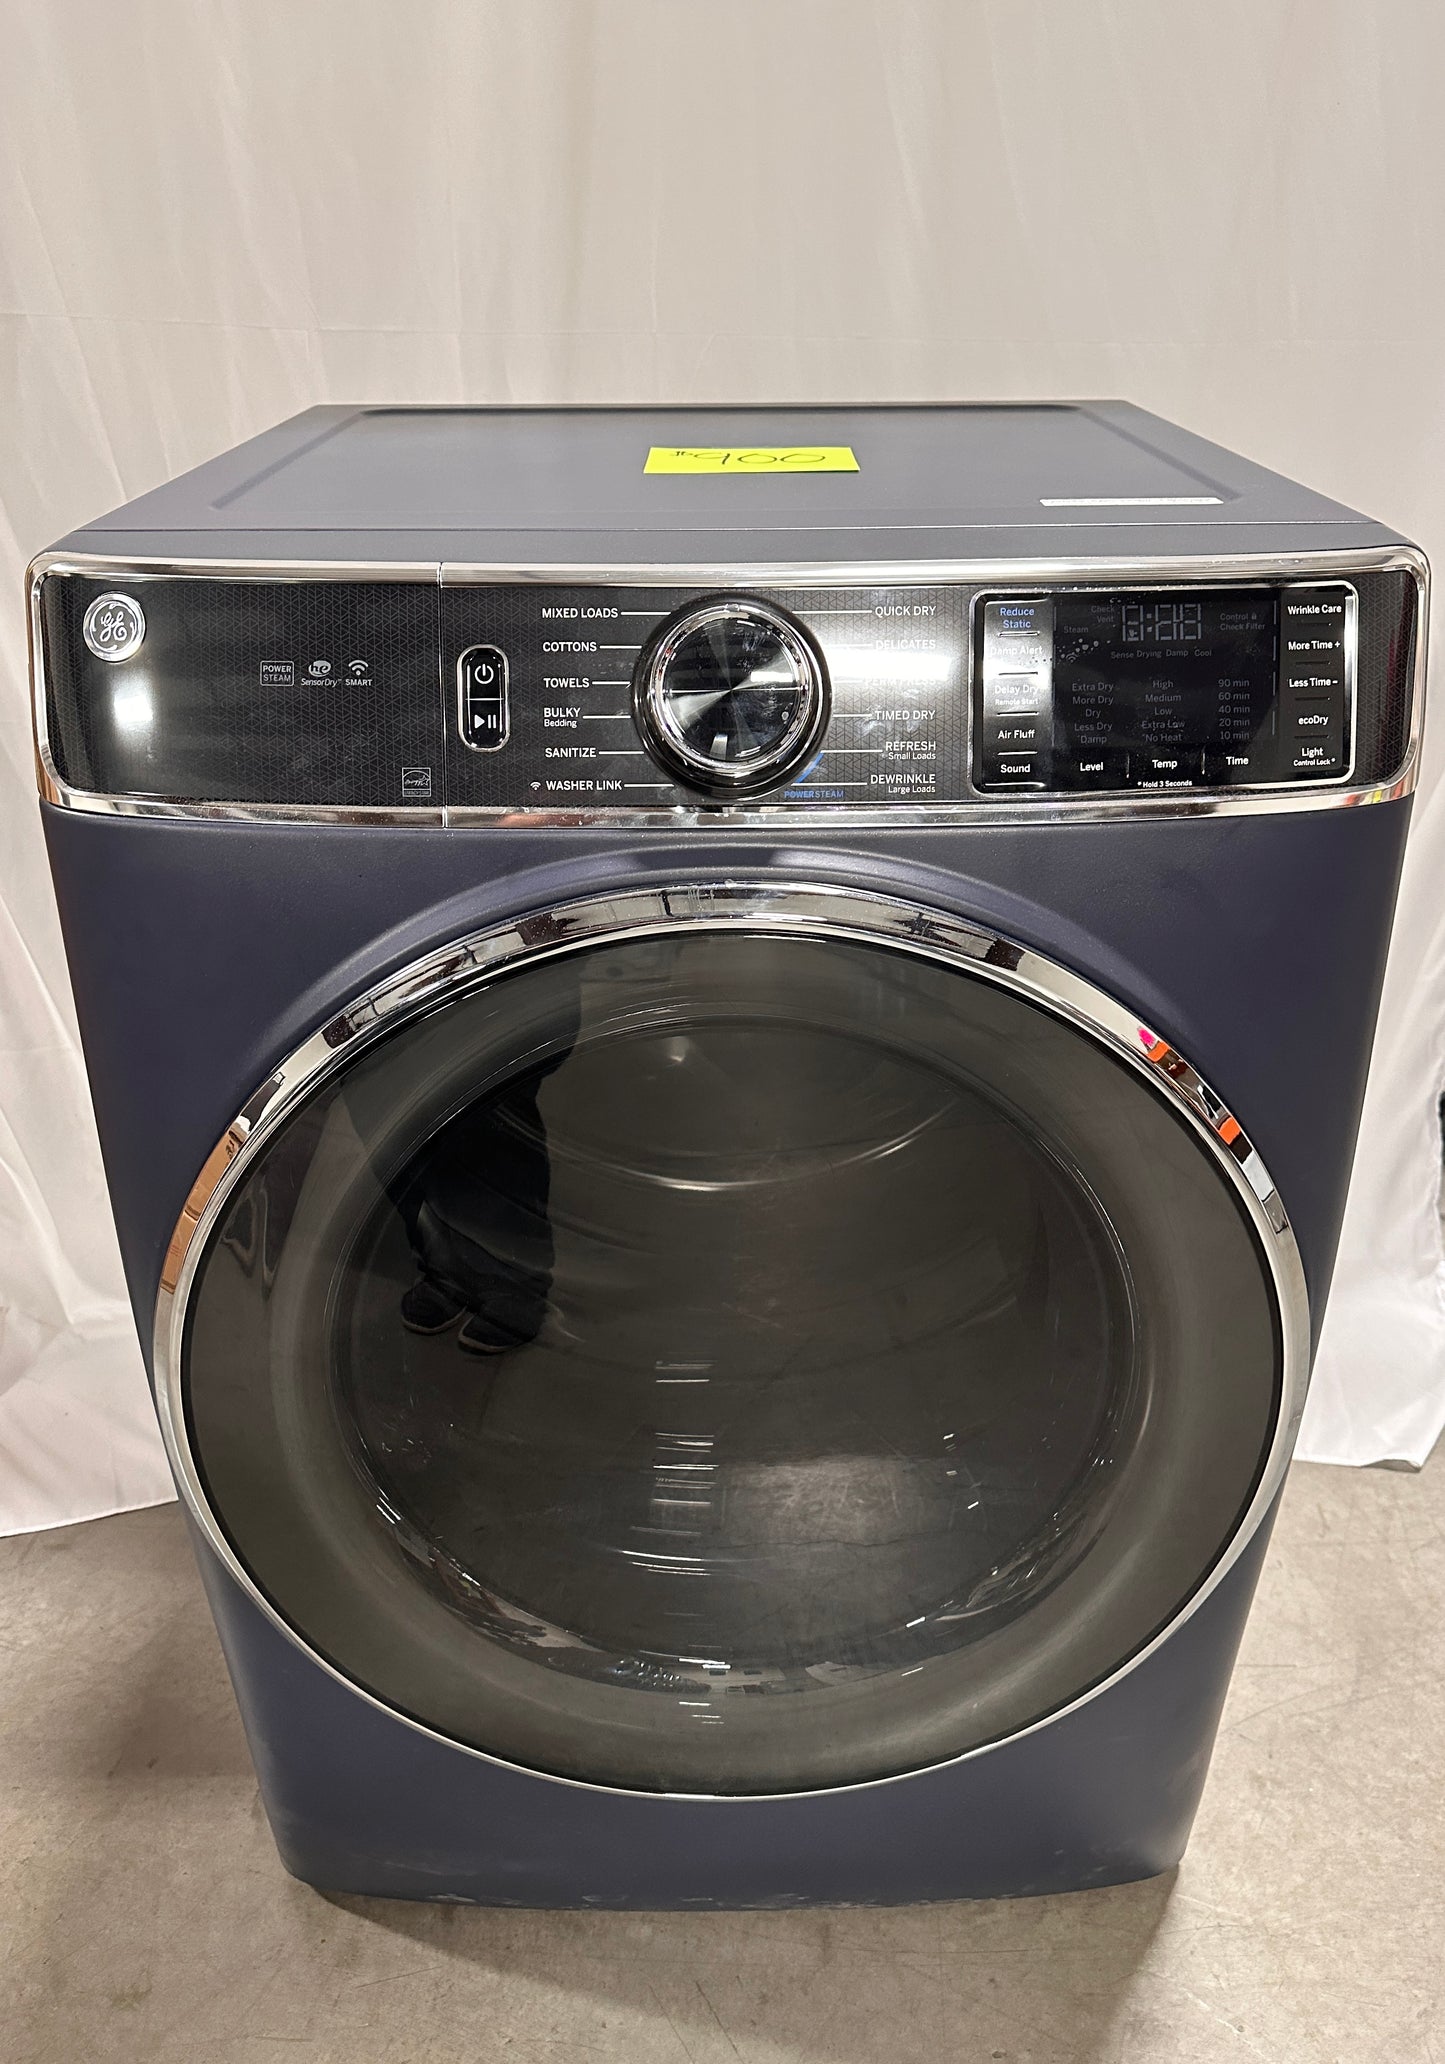 GREAT NEW SAPPHIRE BLUE GE GAS DRYER - DRY12225